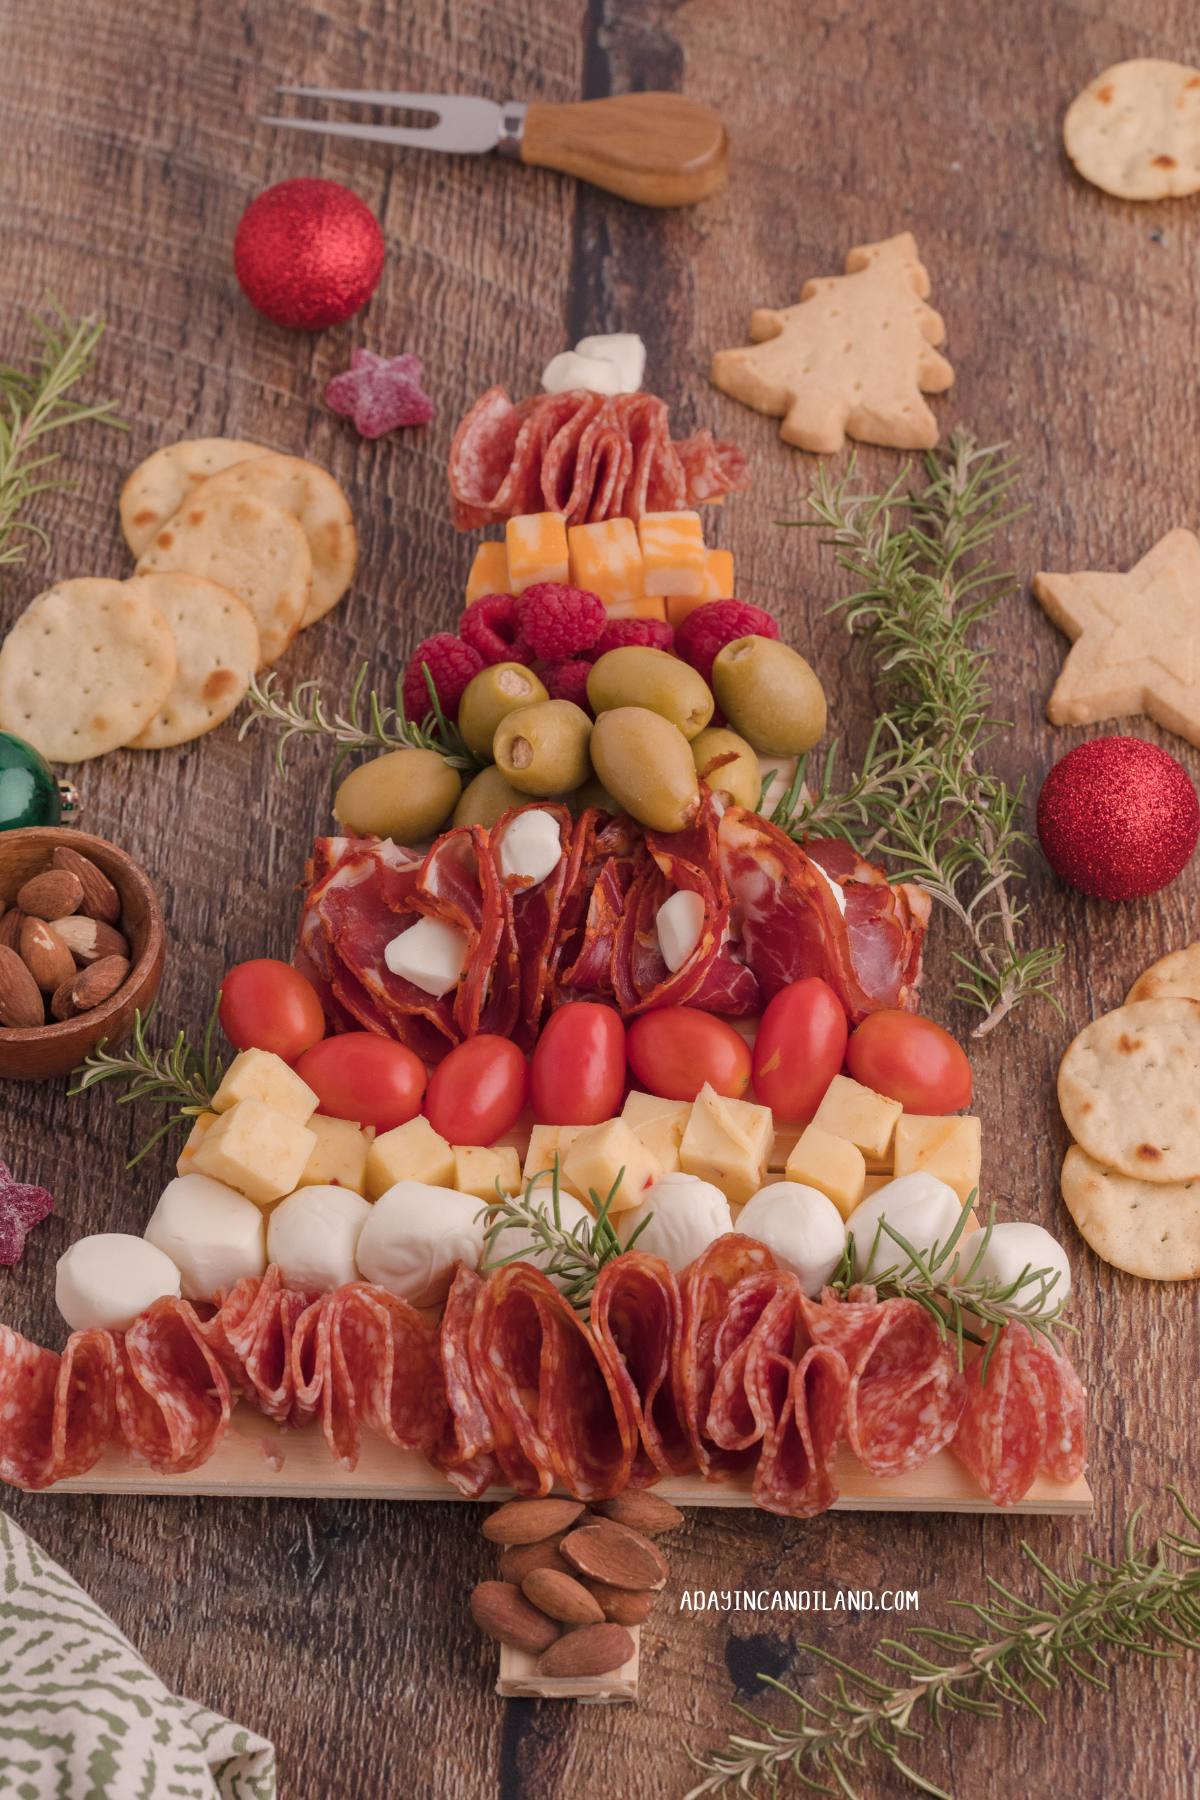 Christmas Cured Meat Gift Set